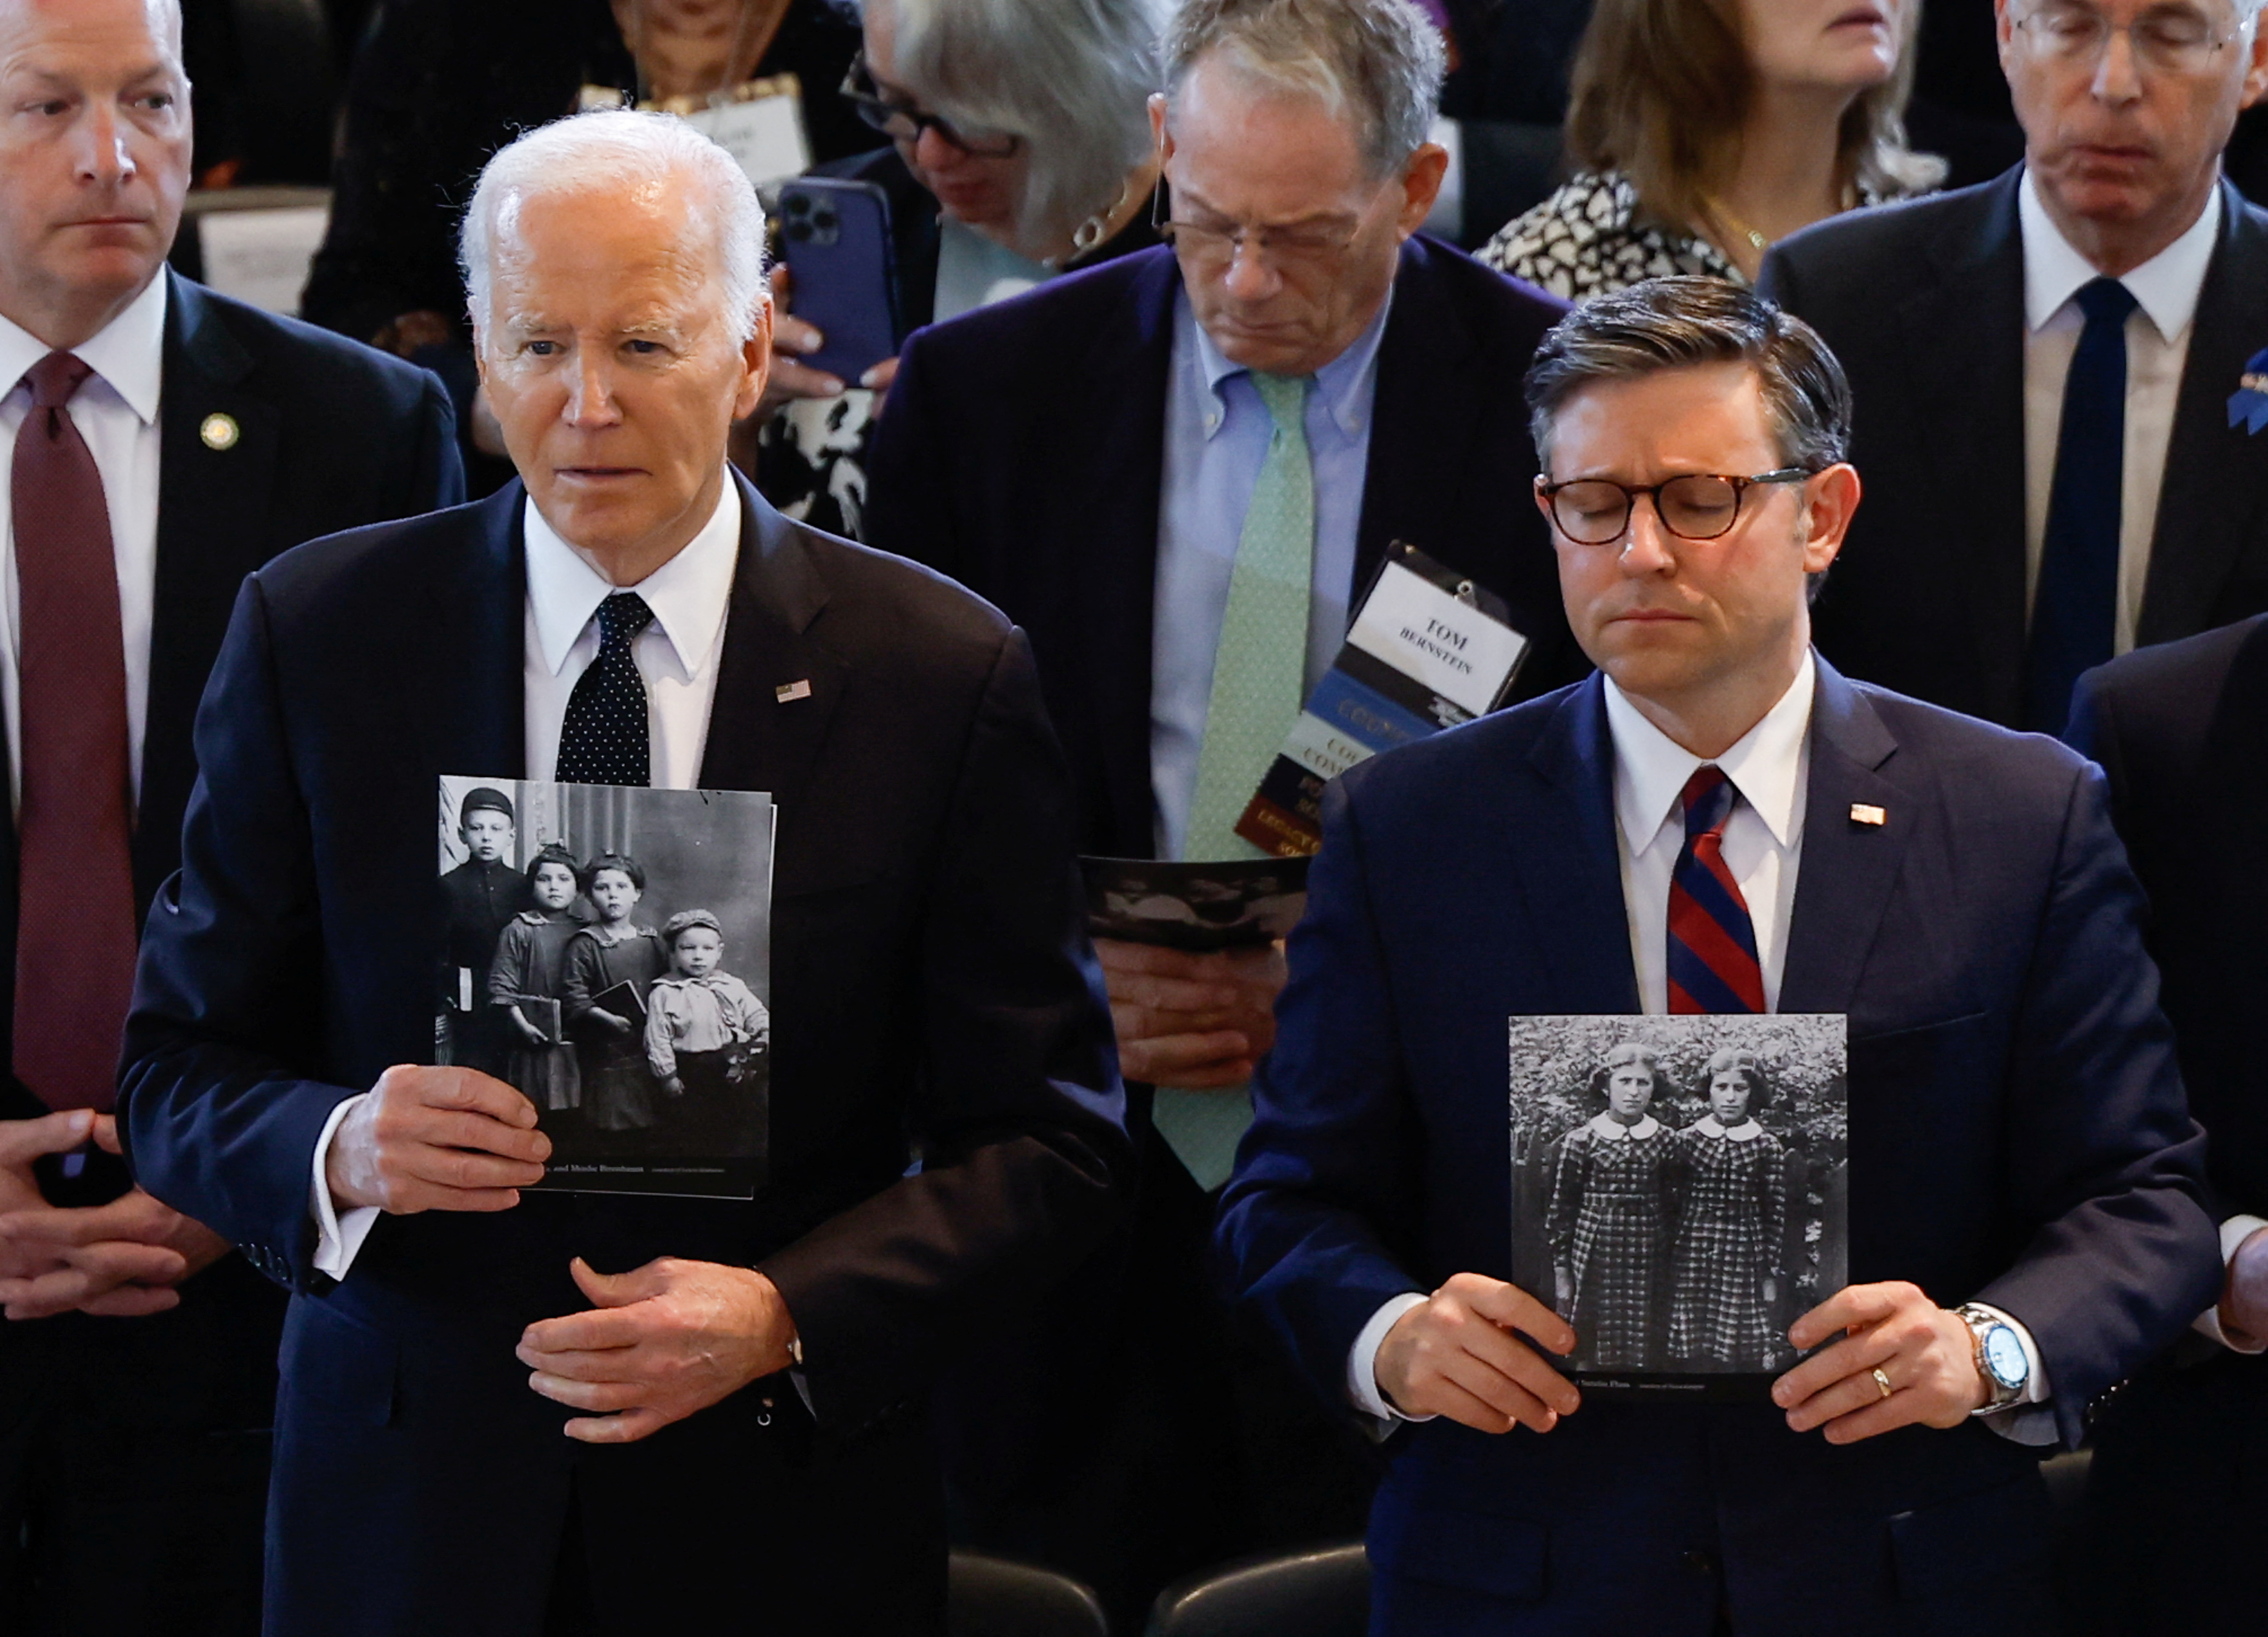 U.S. President Biden addresses at the U.S. Holocaust Memorial Museum's Annual Days of Remembrance ceremony, in Washington